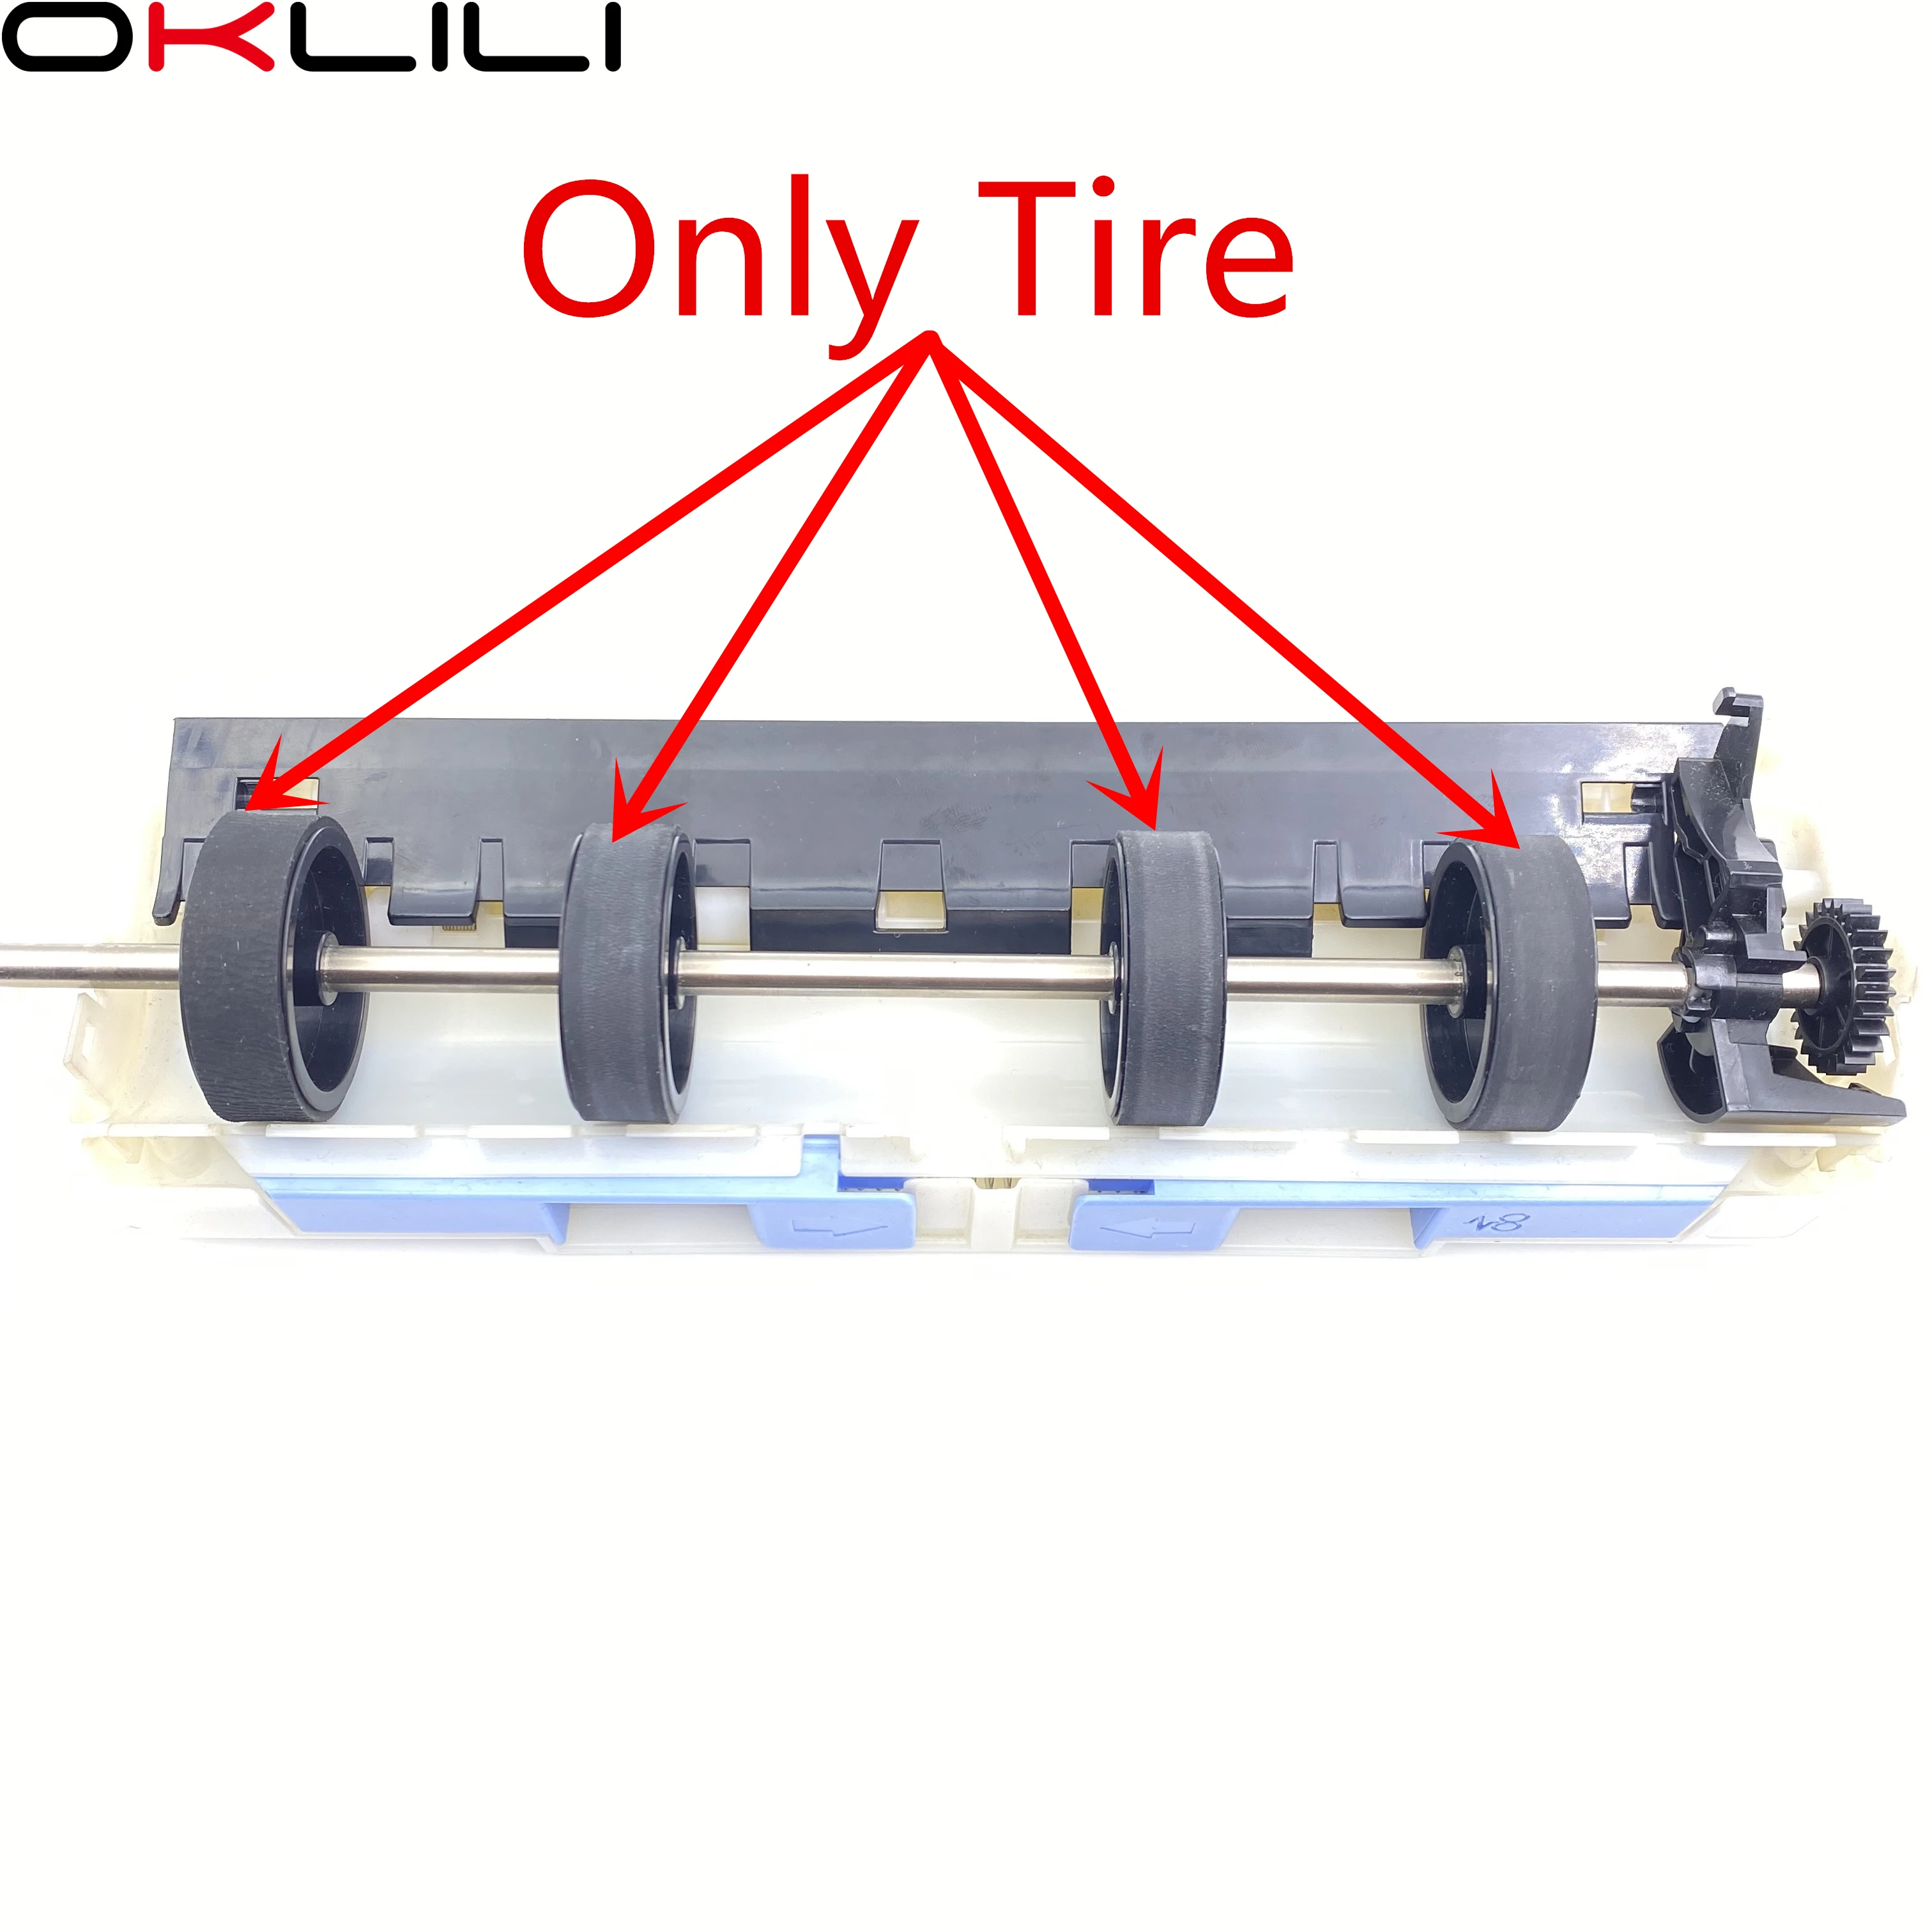 OKLILI 10PC X Duplexer Unit Assy Paper Separation Feed Pickup Roller Tire Compatible with HP OfficeJet 7740 8210 8216 8700 8702 8710 8715 8716 8717 8718 8719 8720 8725